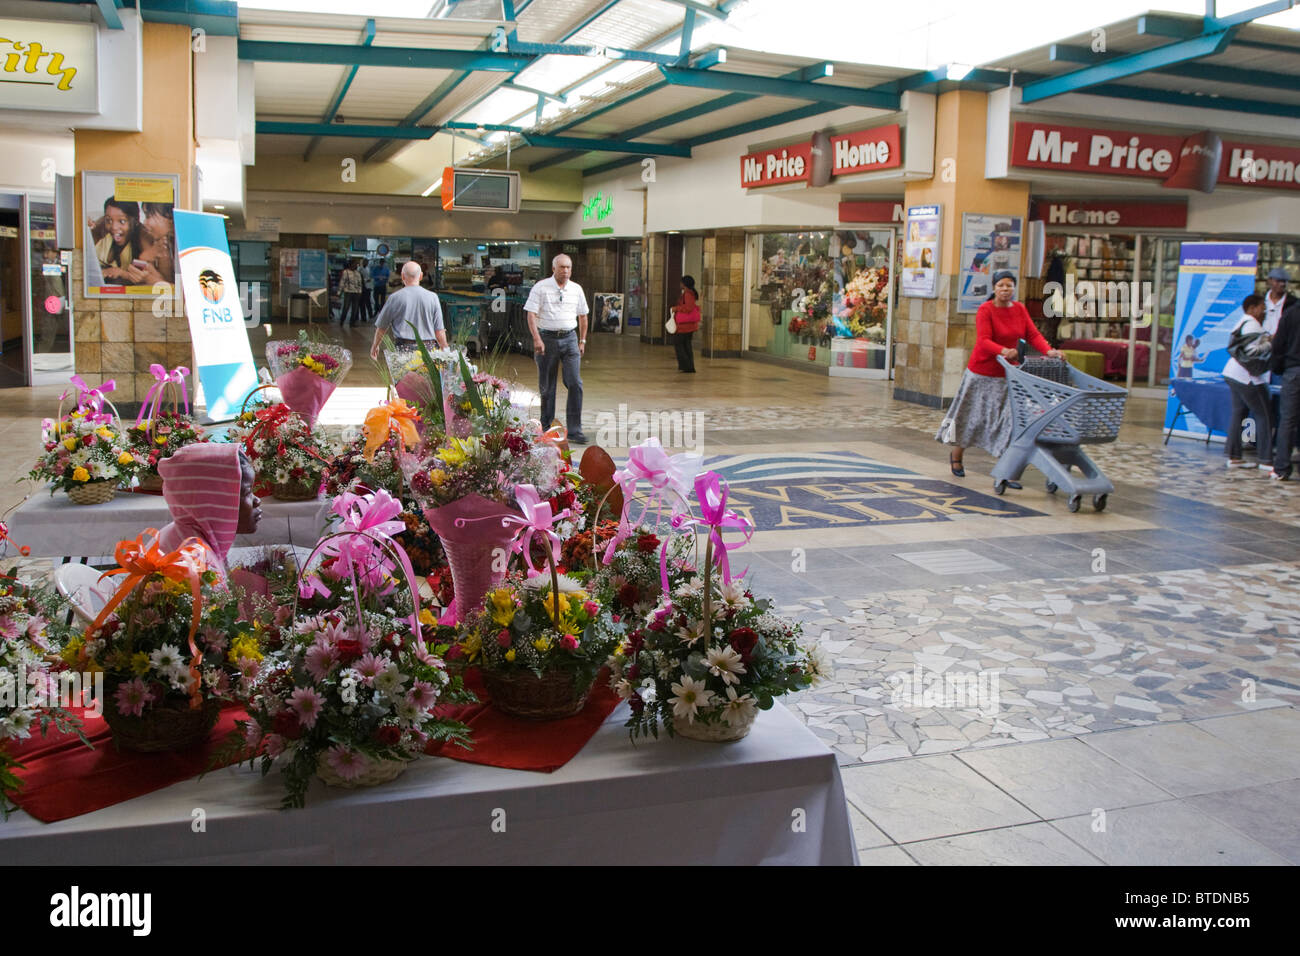 Shoppers in the Riverwalk Shopping Mall with bouquets of flowers on display in the foreground Stock Photo